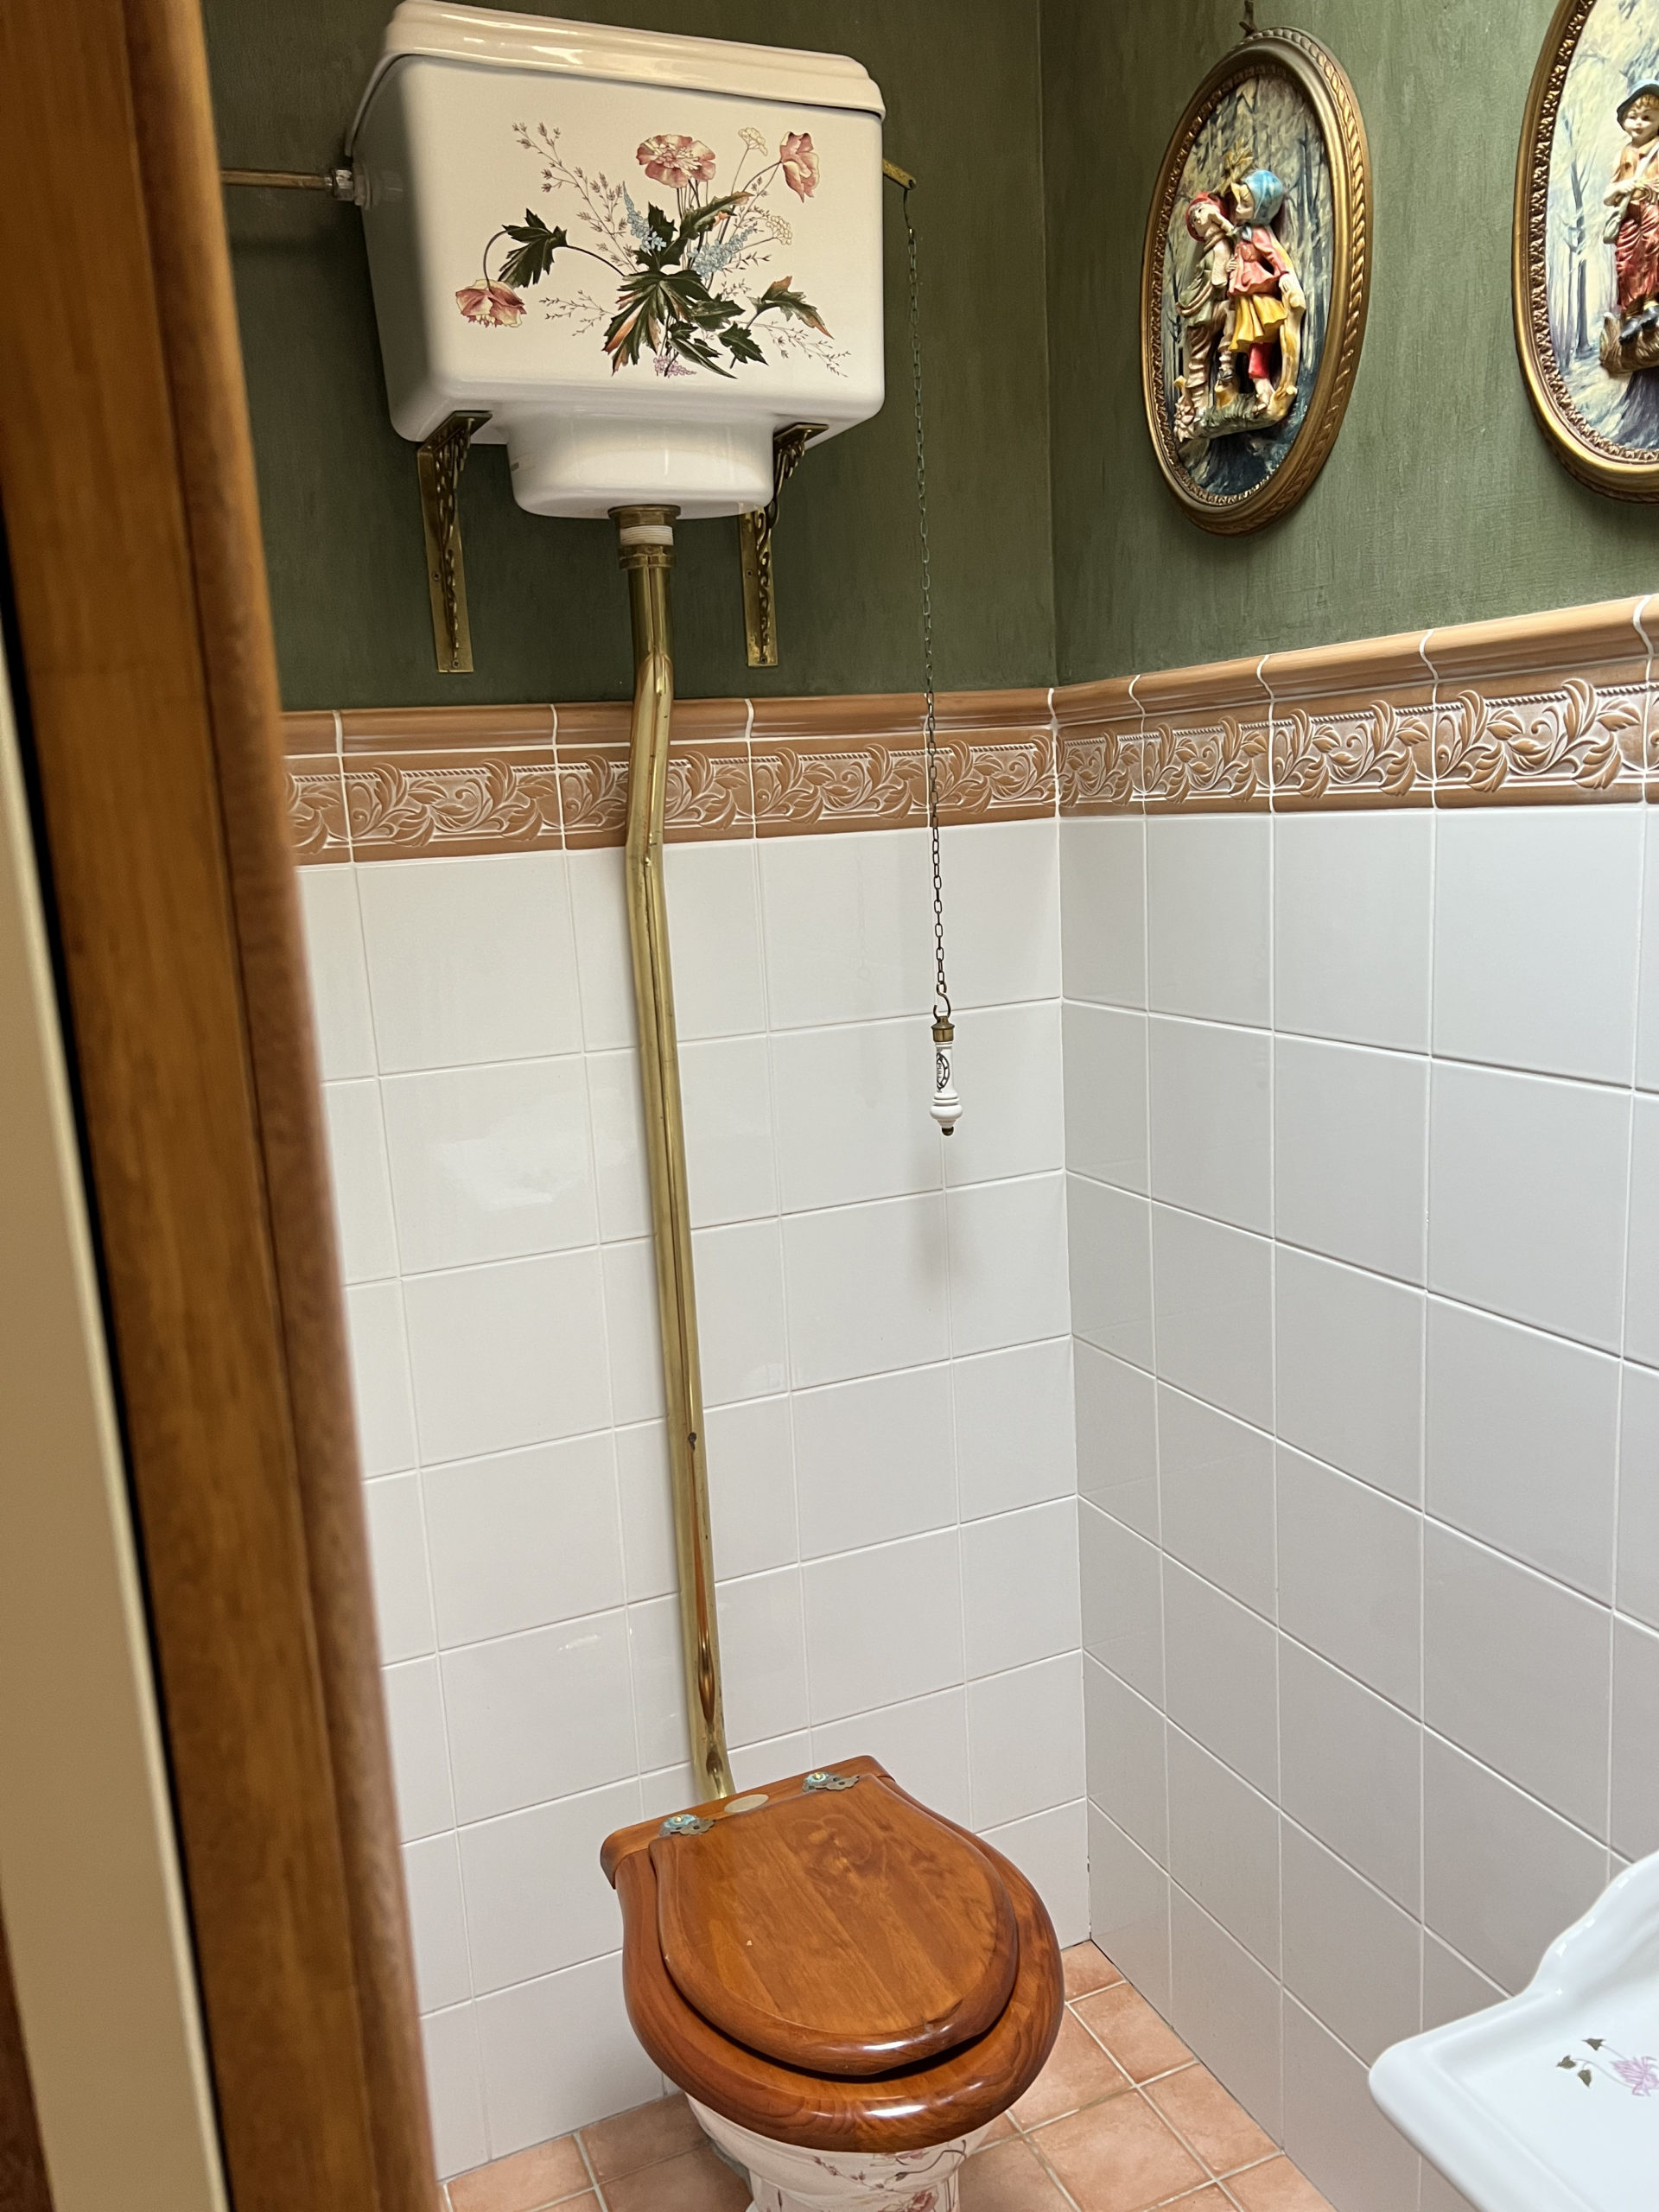 old fashioned high-tank toilet with chain, decorated ceramic